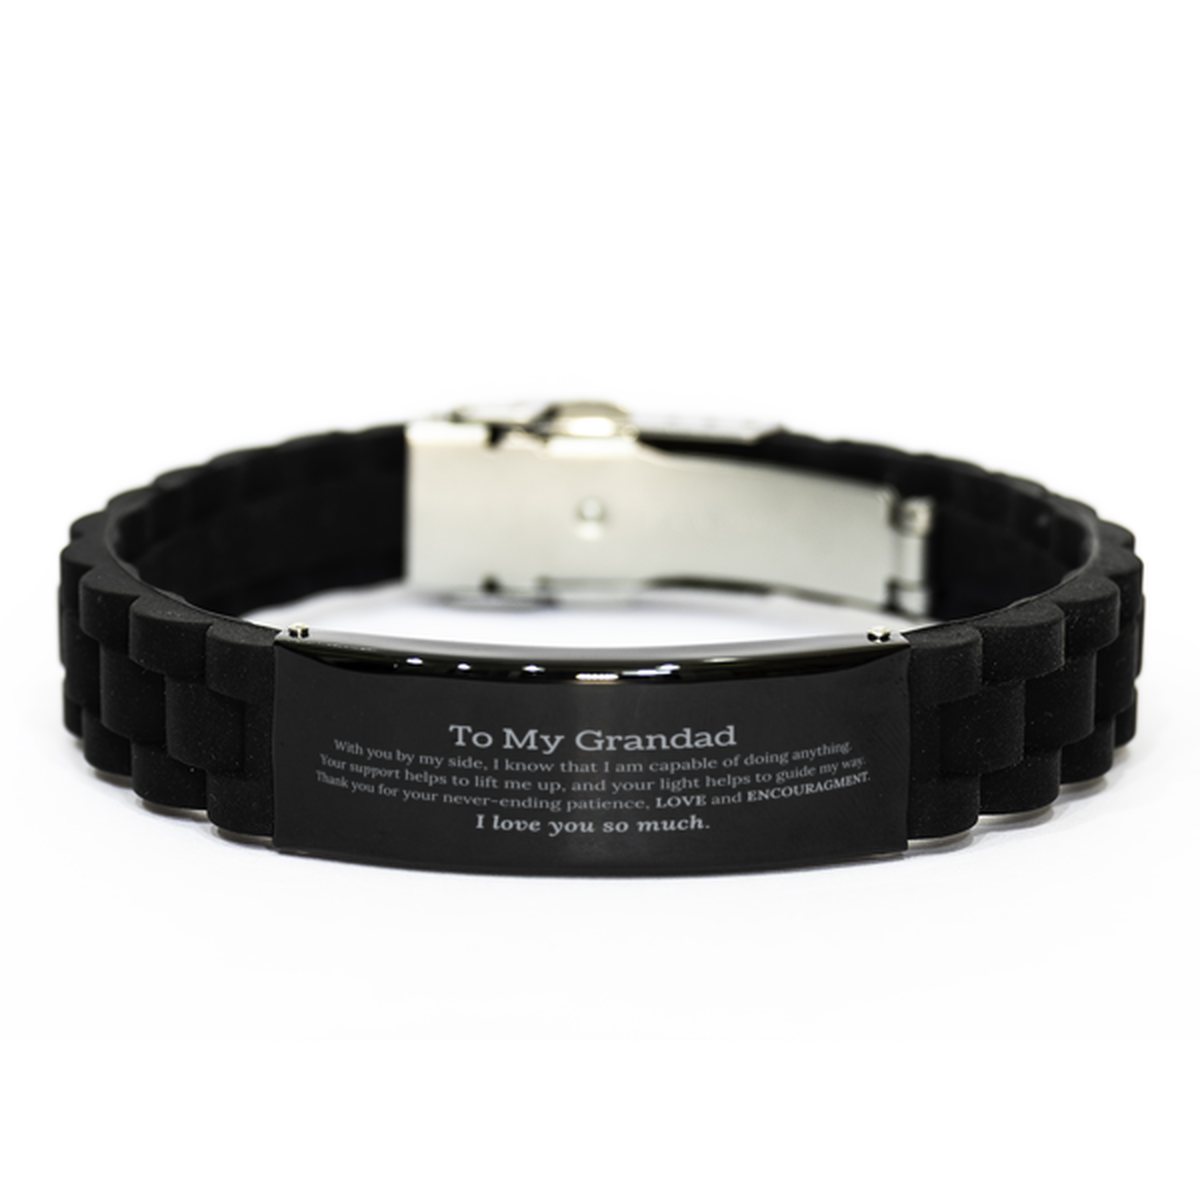 Appreciation Grandad Black Glidelock Clasp Bracelet Gifts, To My Grandad Birthday Christmas Wedding Keepsake Gifts for Grandad With you by my side, I know that I am capable of doing anything. I love you so much